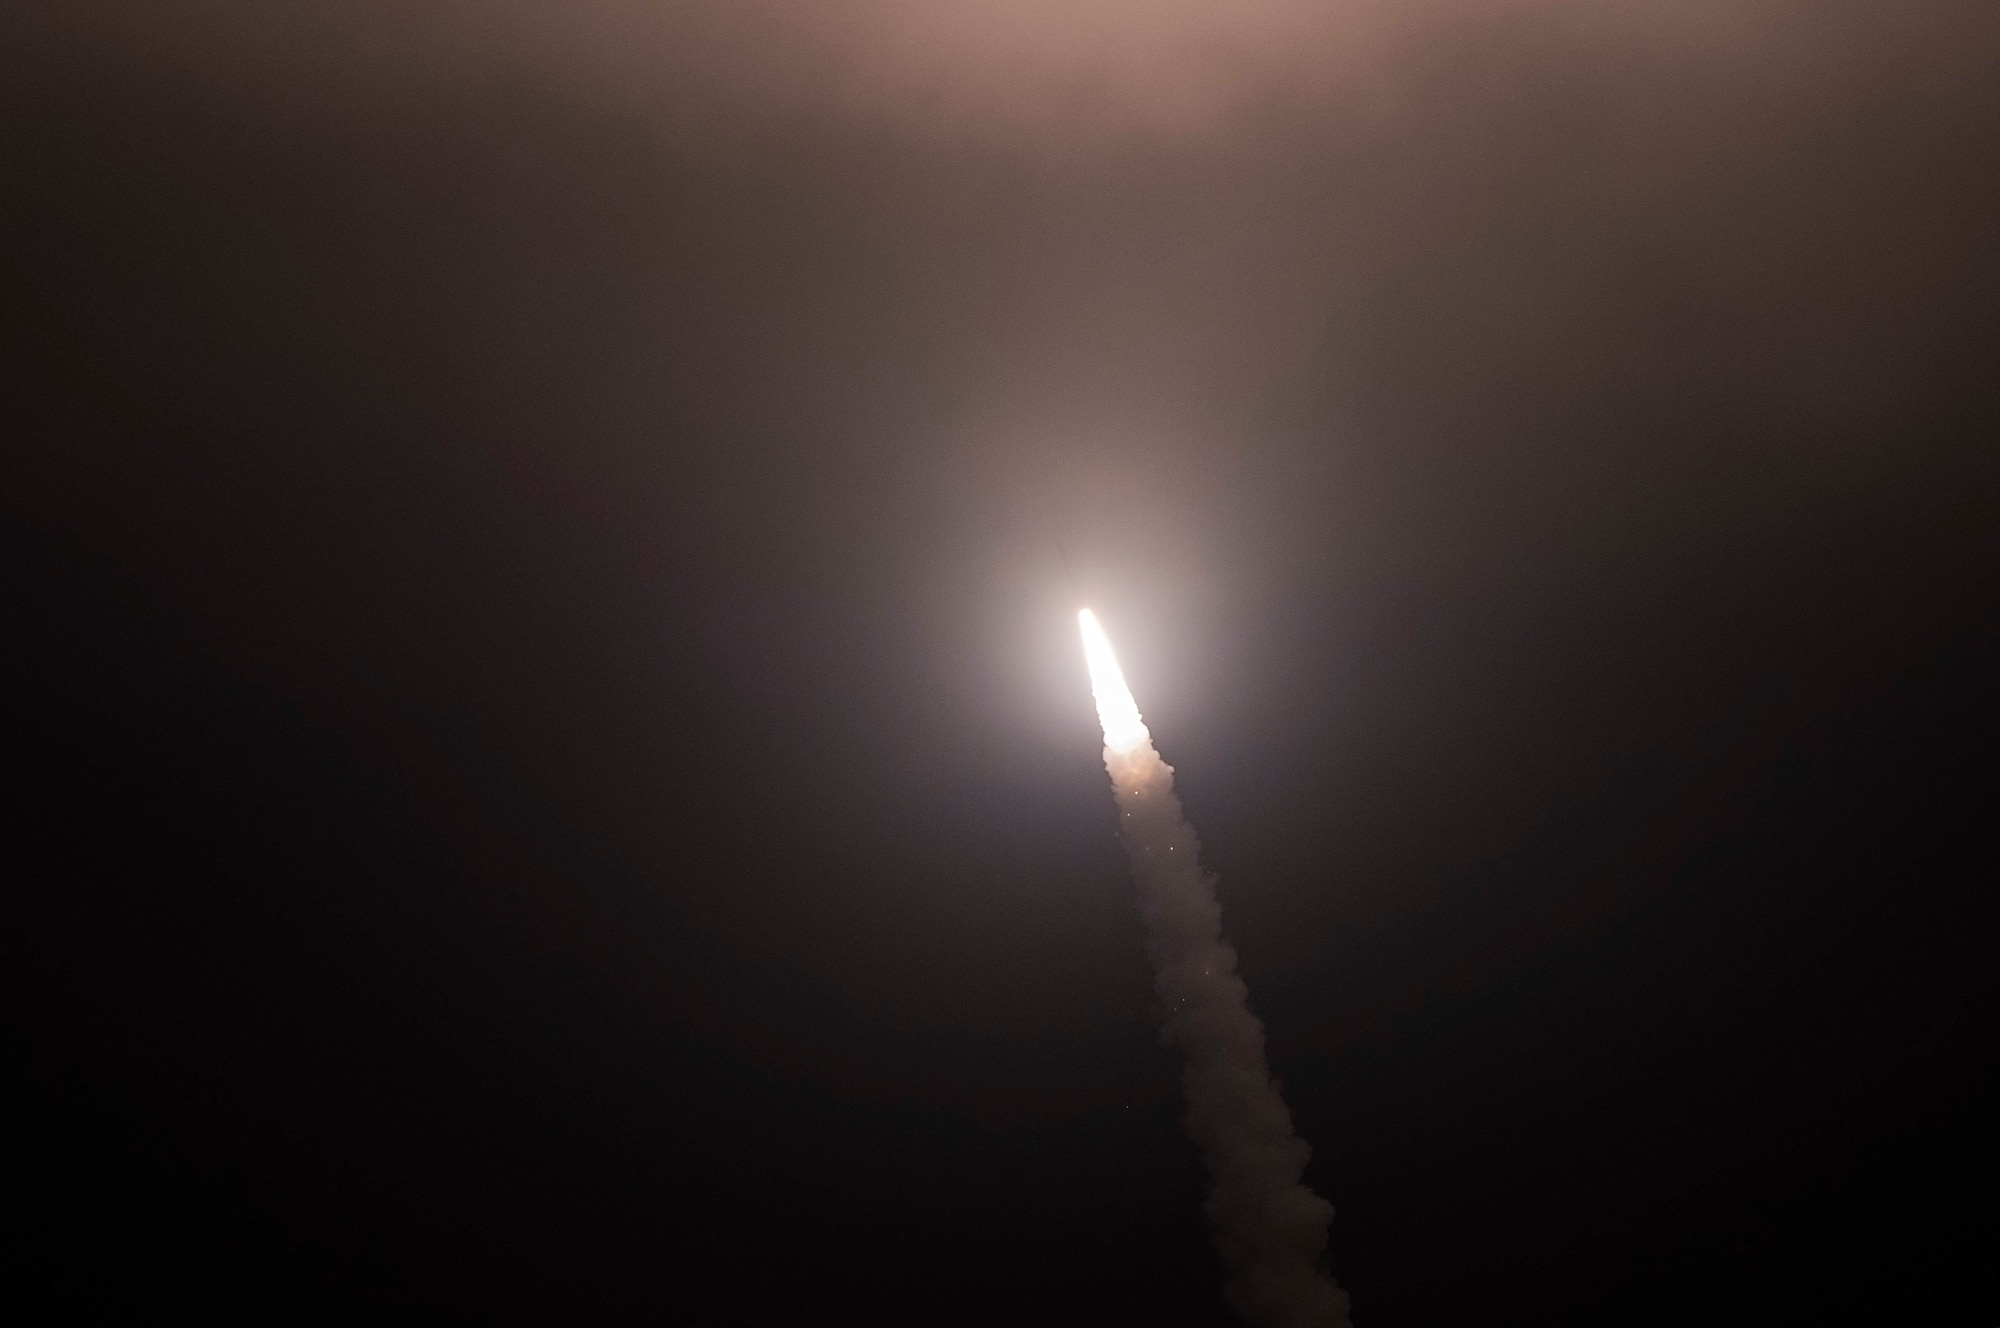 An unarmed Minuteman III intercontinental ballistic missile launches during an operational test at 12:40 Pacific Daylight Time Thursday May 9, 2019, at Vandenberg Air Force Base, Calif. (U.S. Air Force photo by Airman 1st Class Hanah Abercrombie)